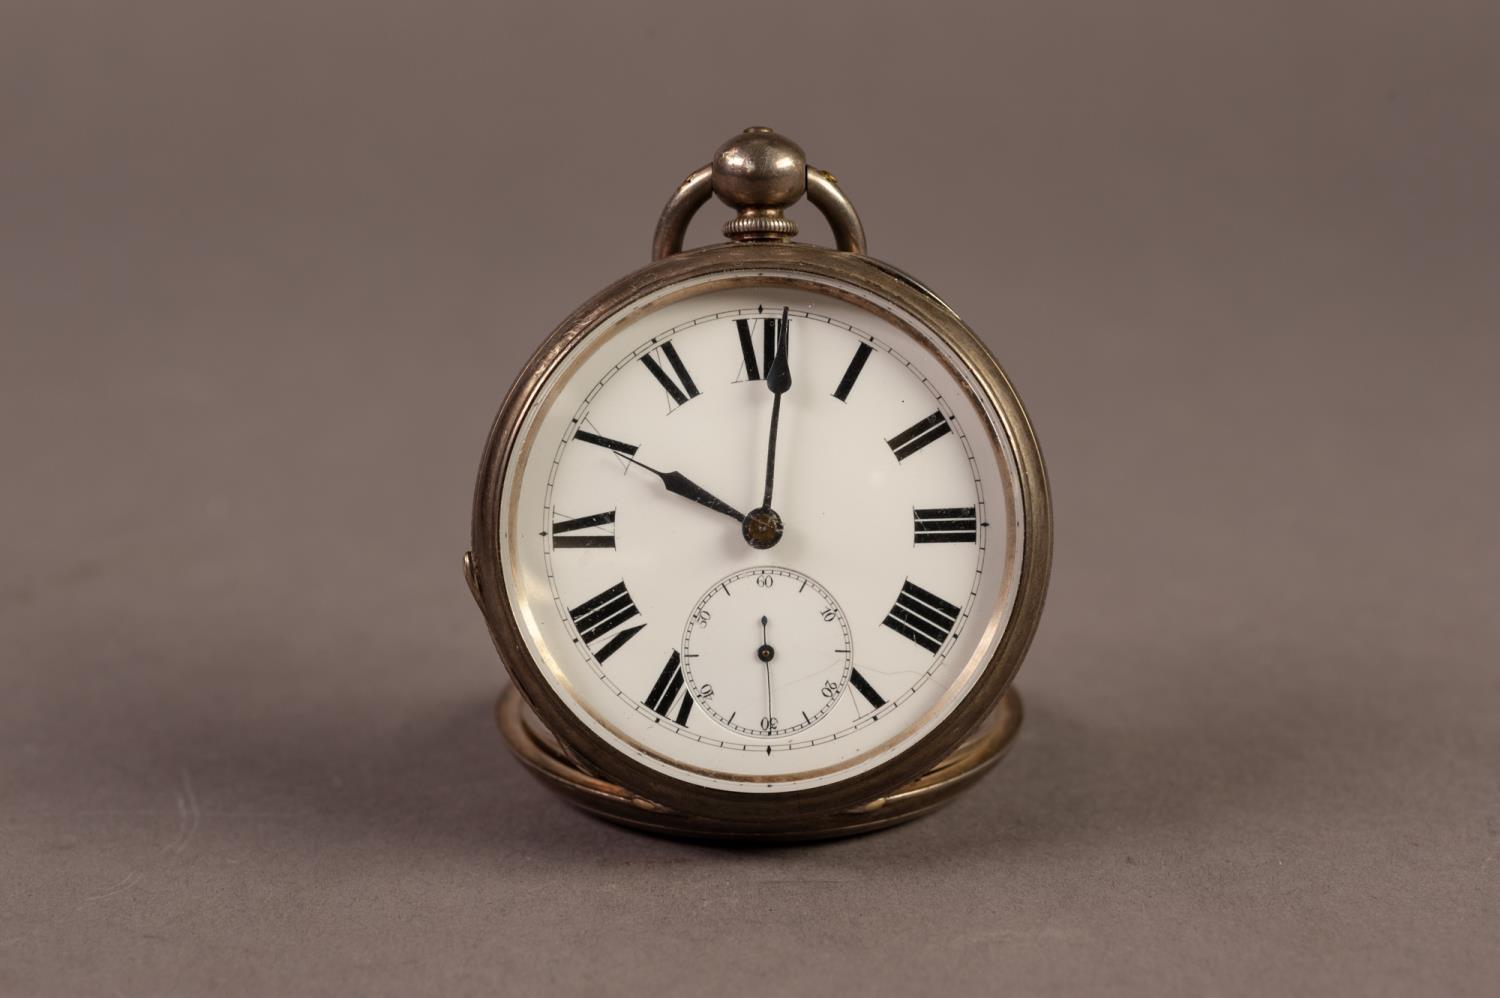 LARGE OPEN FACED POCKET WATCH with key wind movement, white Roman dial, having subsidiary seconds - Image 2 of 3